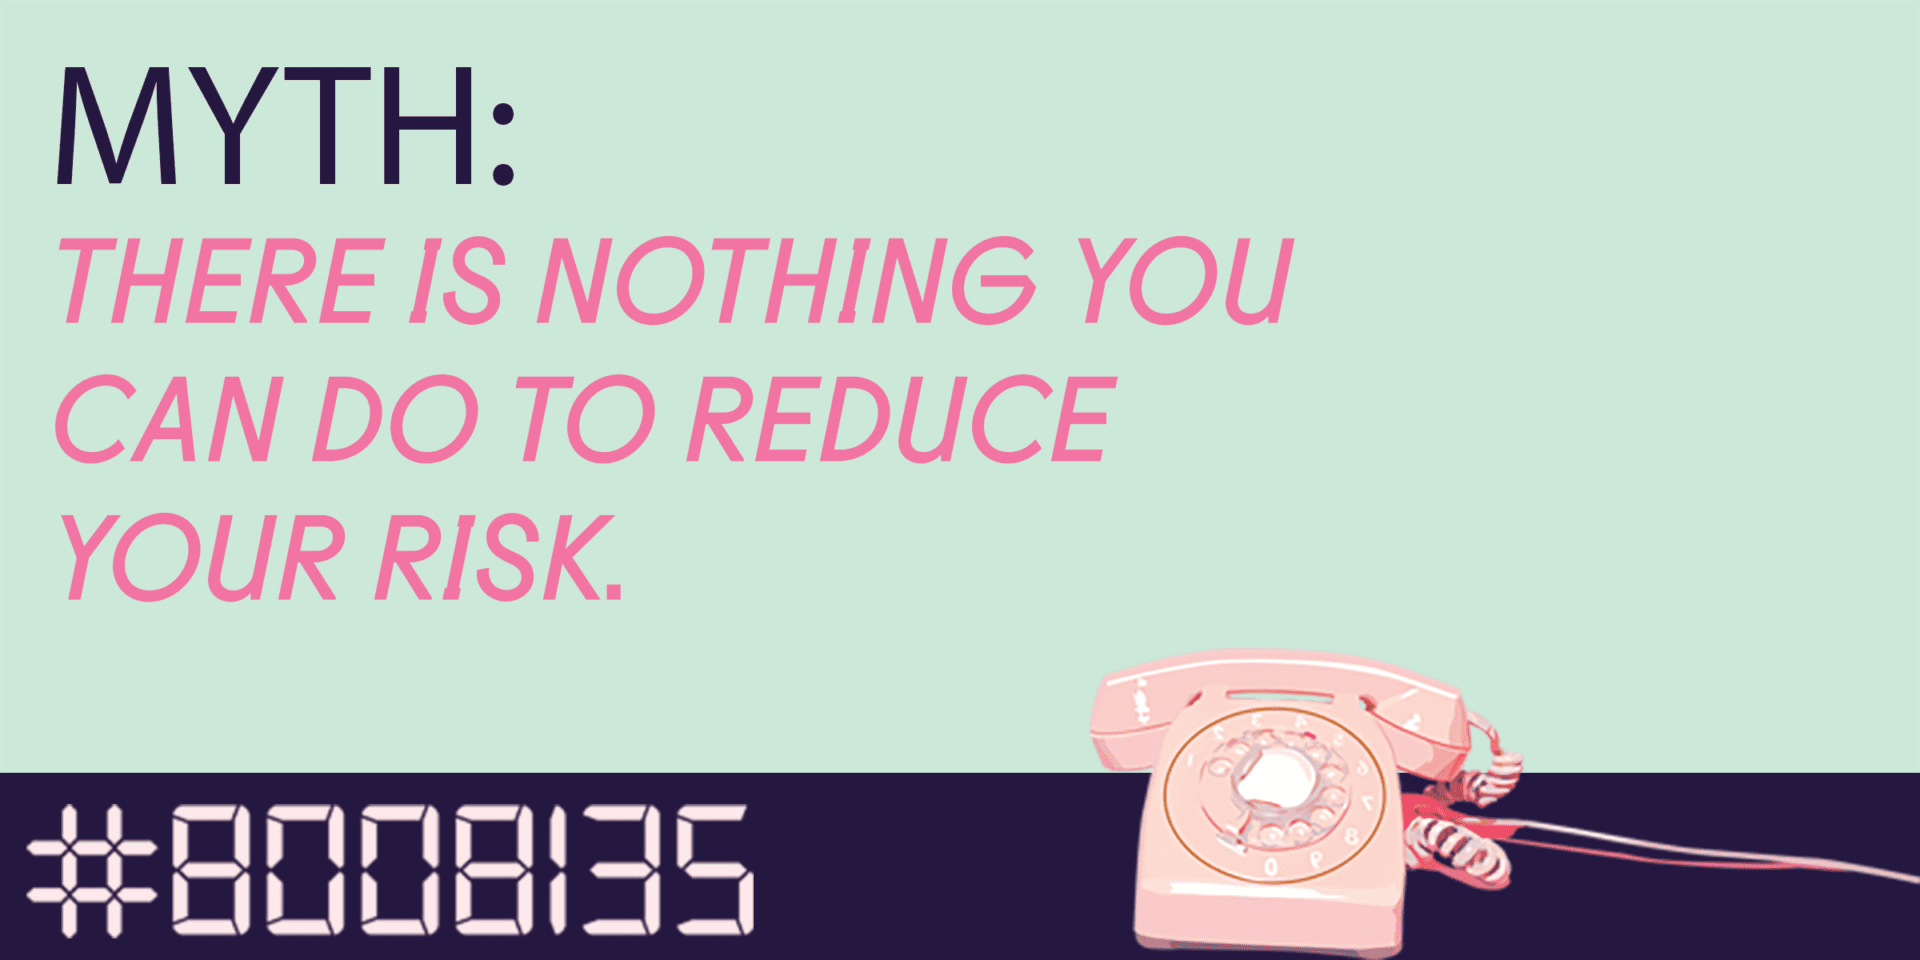 Myth: There is nothing you can do to reduce your risk. - Rethink